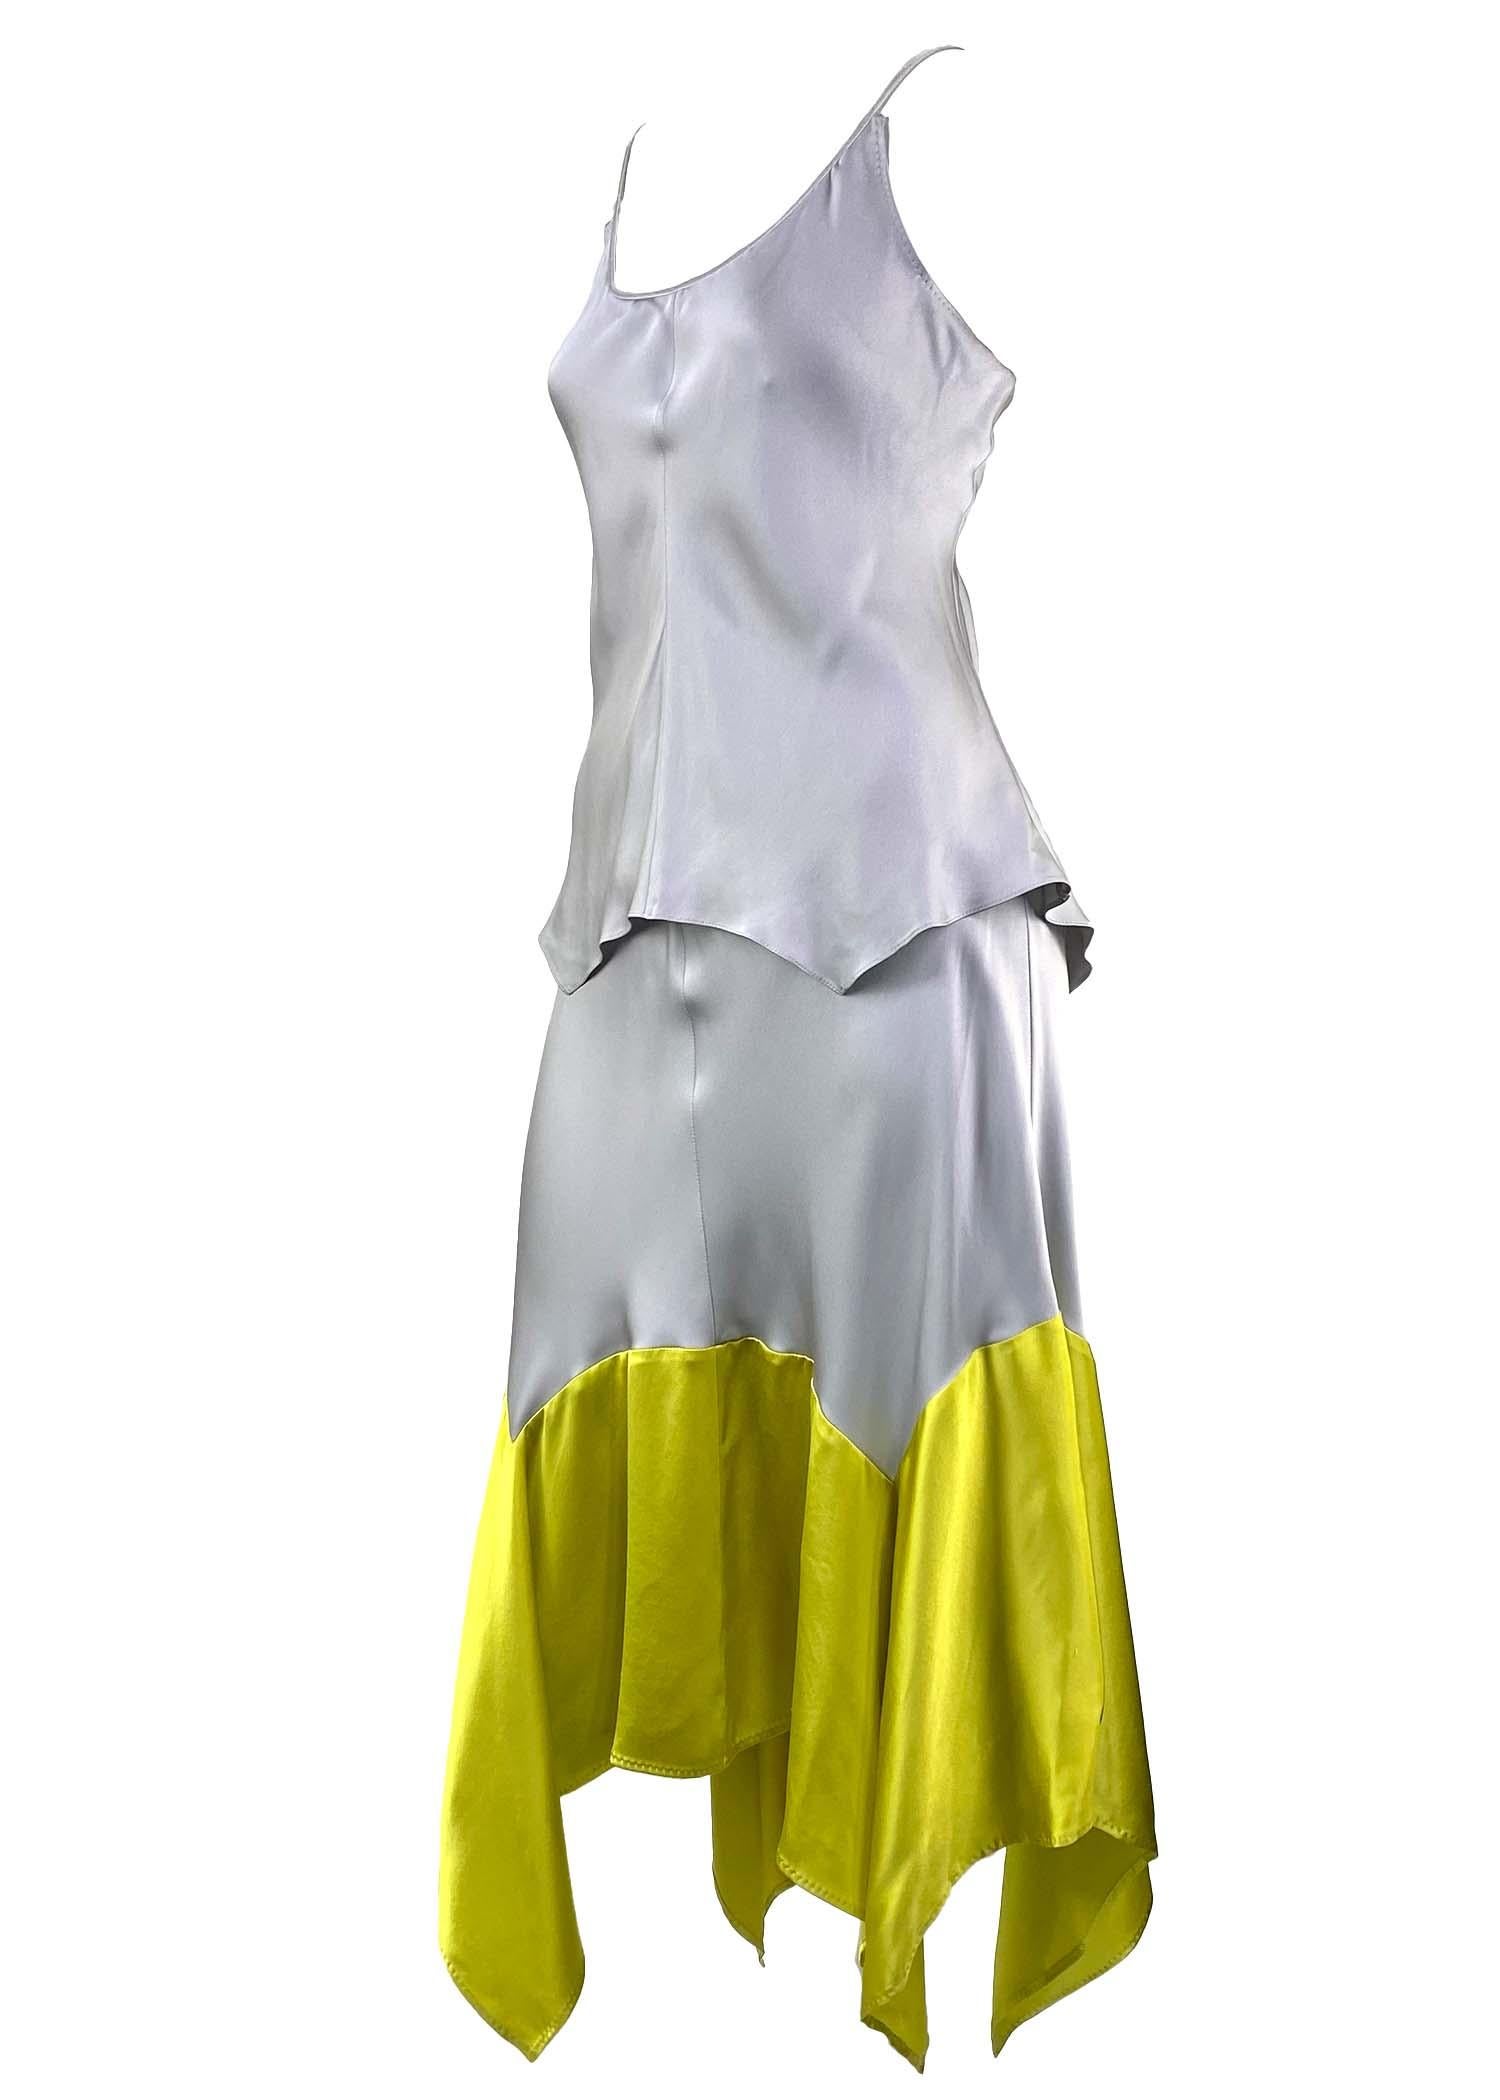 NWT S/S 2004 Yves Saint Laurent by Tom Ford Yellow Grey Handkerchief Dress In Excellent Condition For Sale In West Hollywood, CA